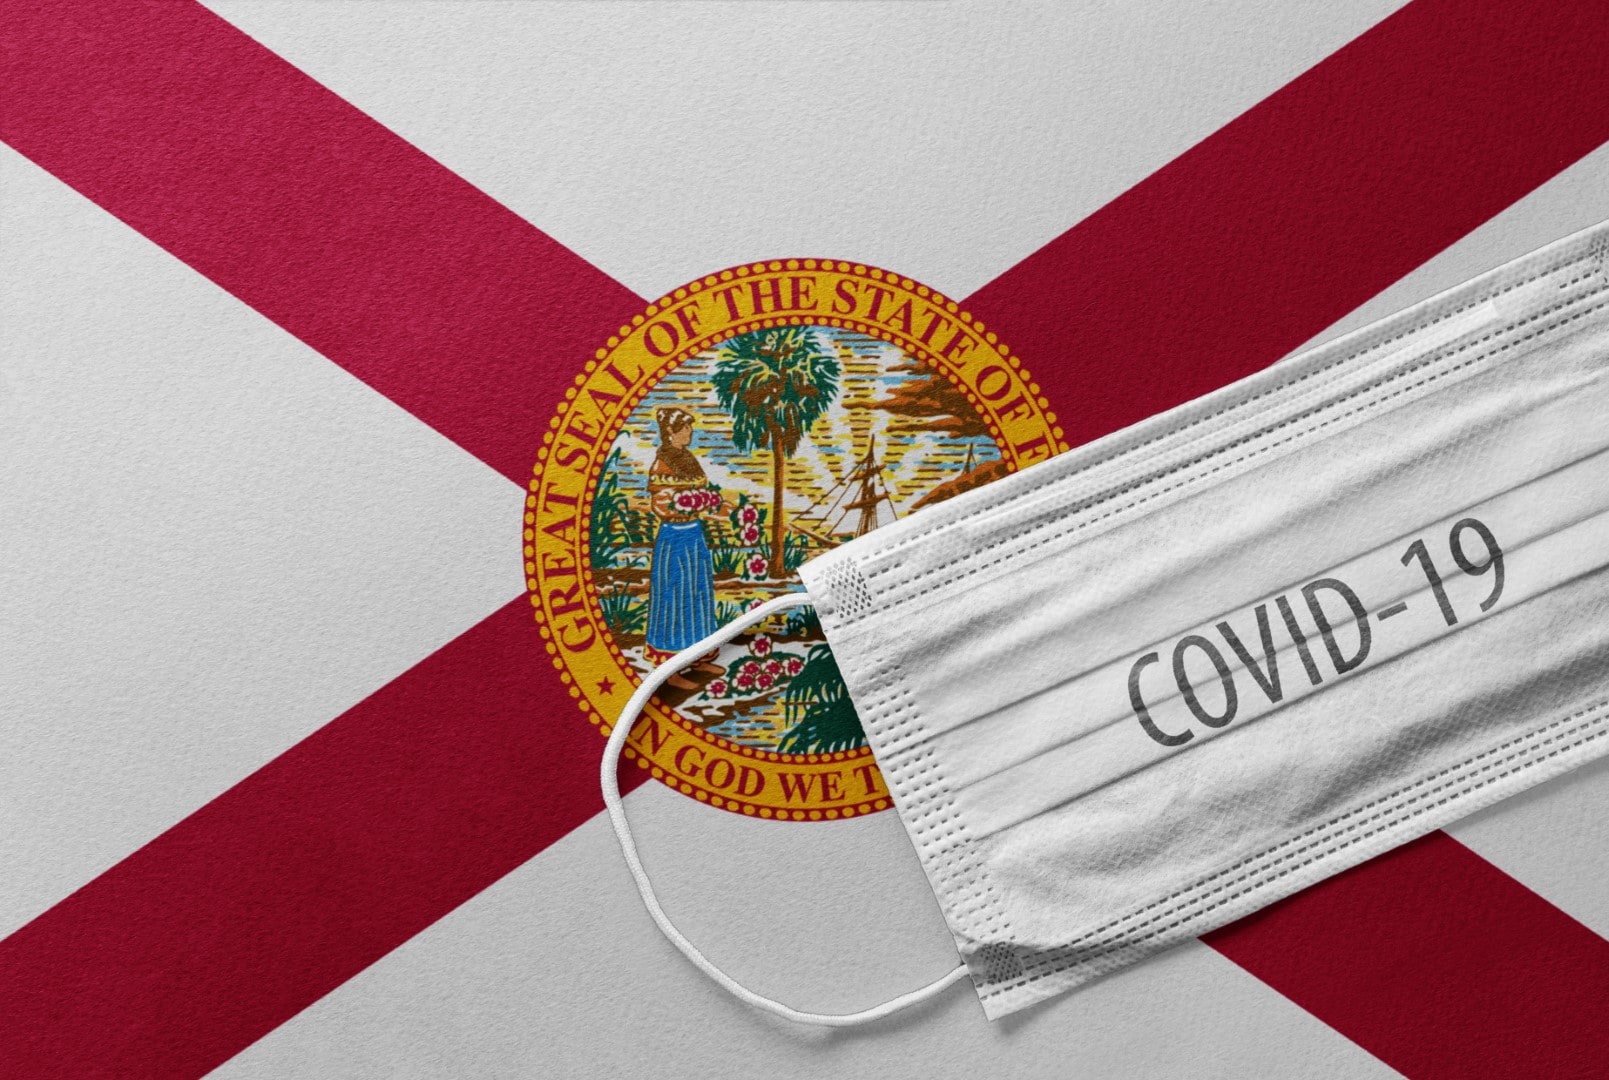 Face Medical Surgical White Mask with COVID-19 inscription lying on Florida State Flag. Coronavirus in Florida